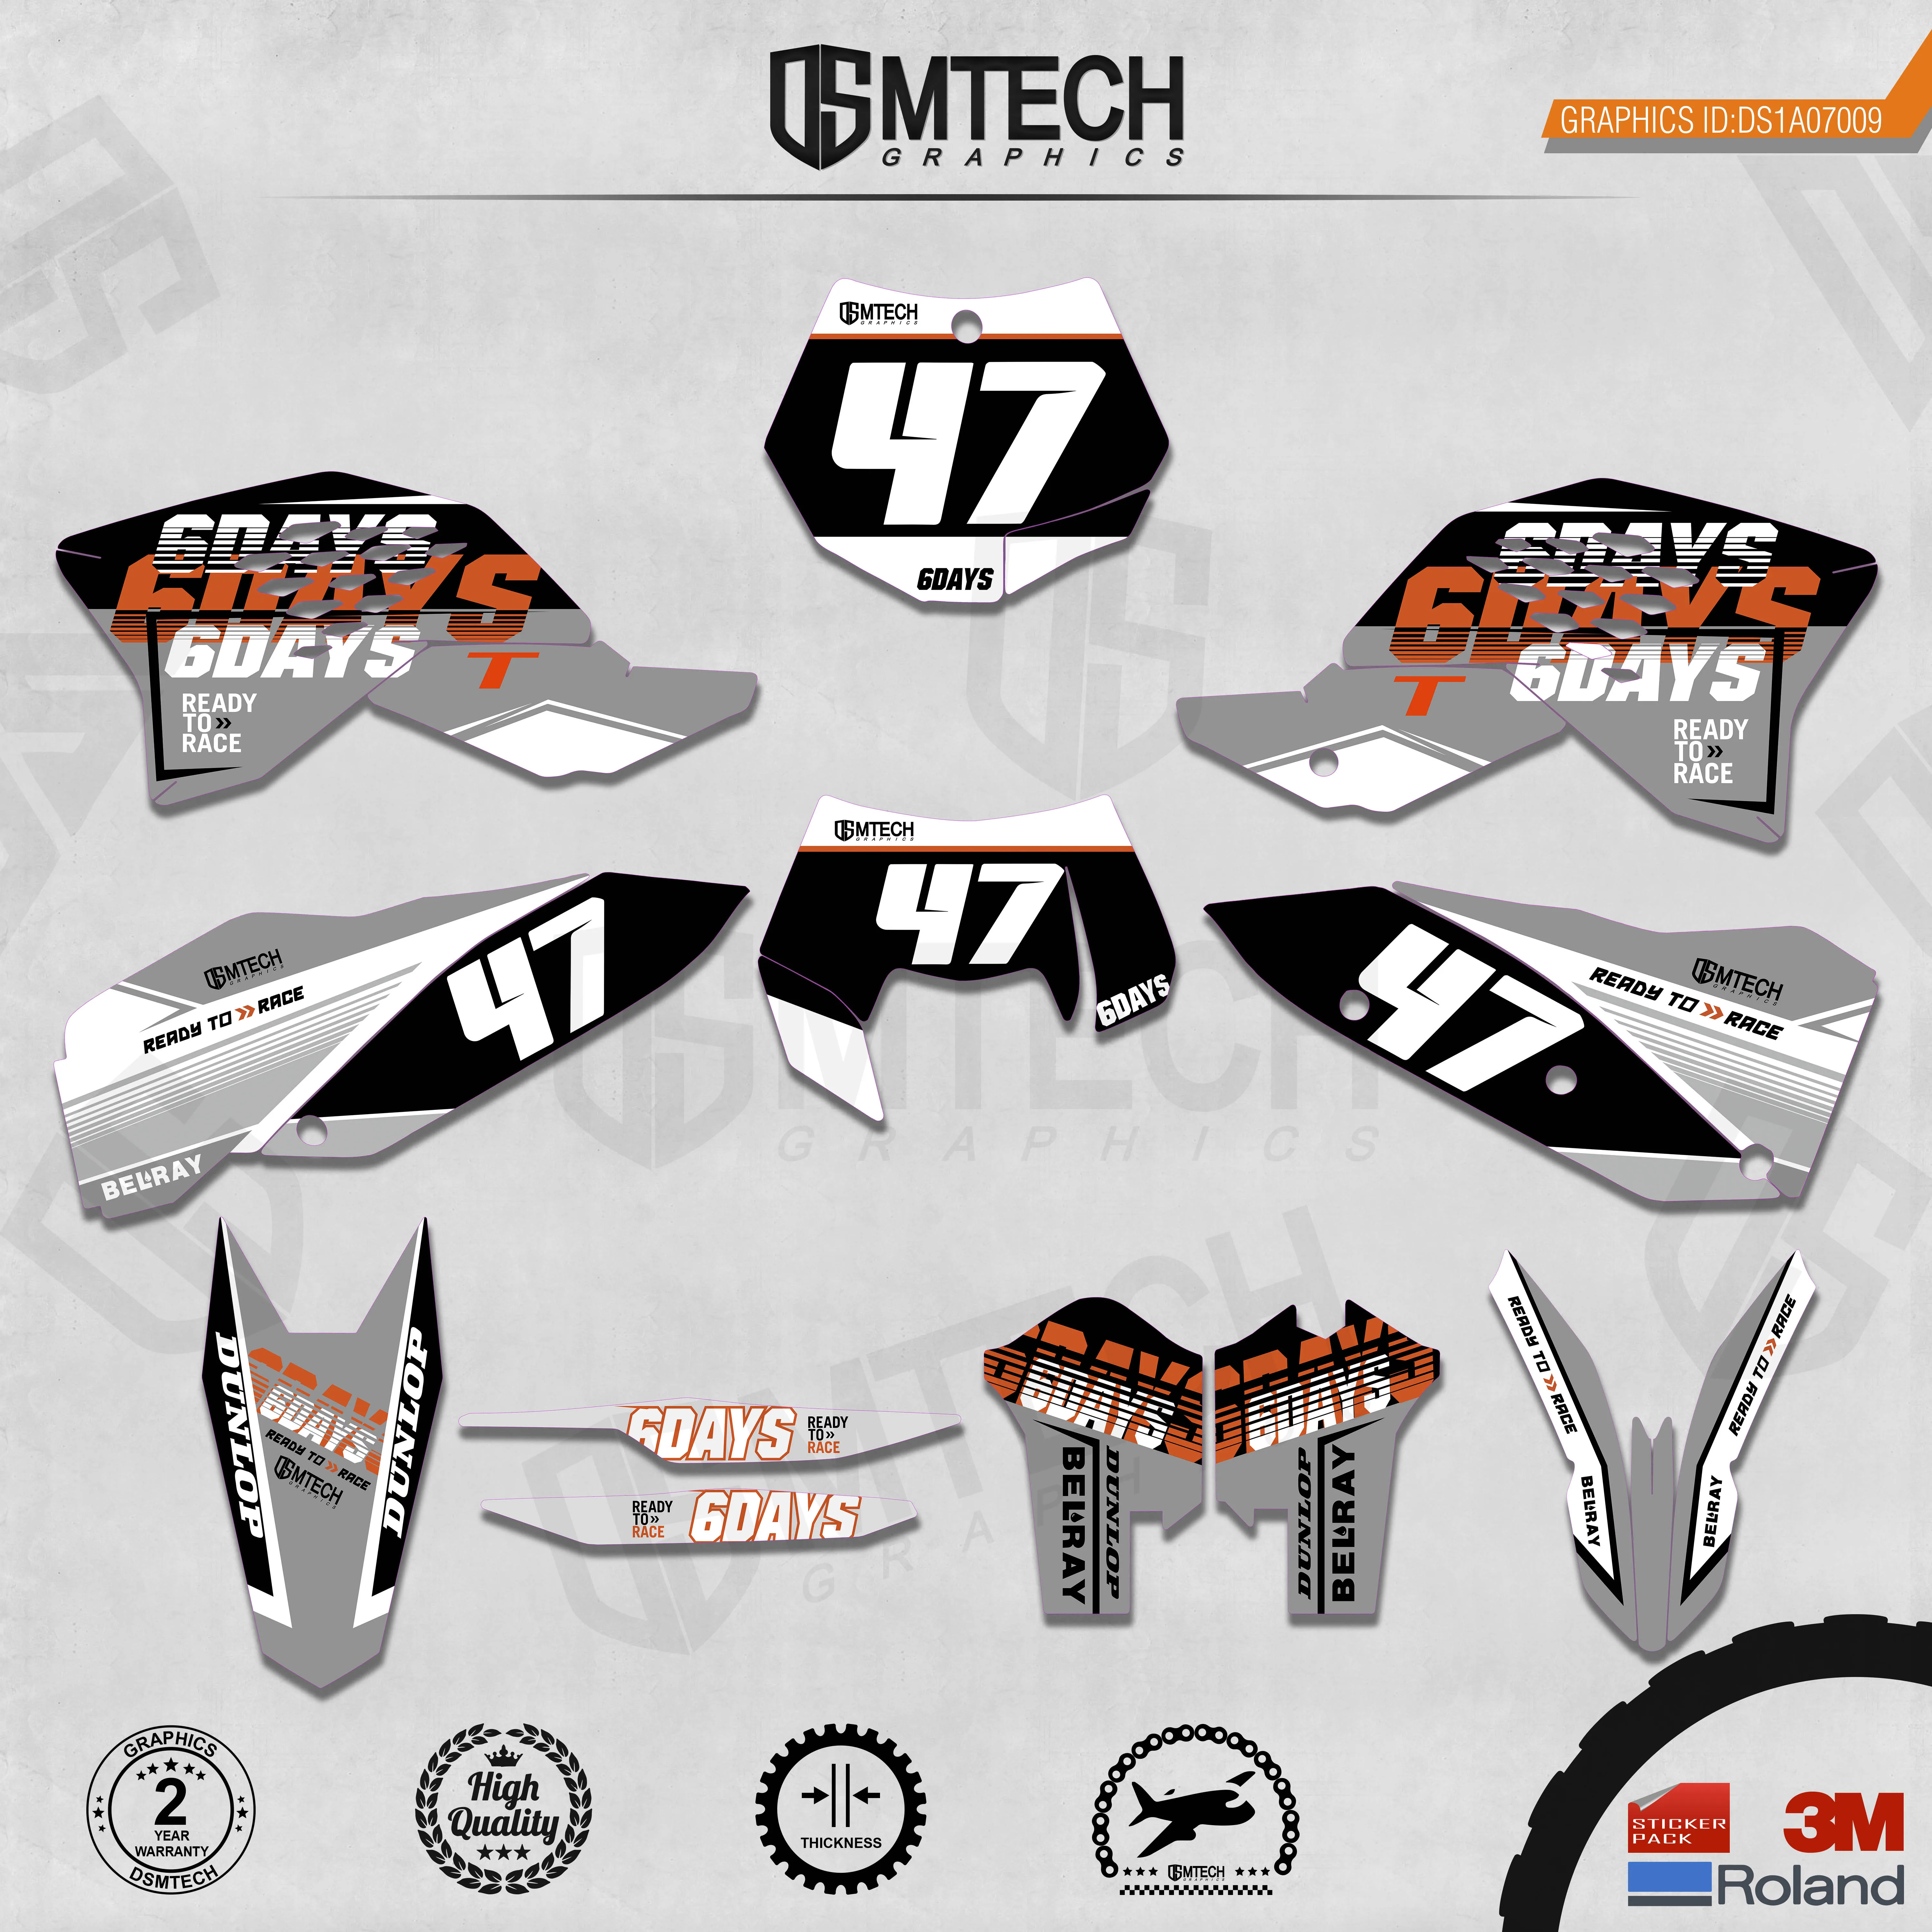 DSMTECH Customized Team Graphics Backgrounds Decals 3M Custom Stickers For 2007-2010 SXF  2008-2011 EXC 6Days  009